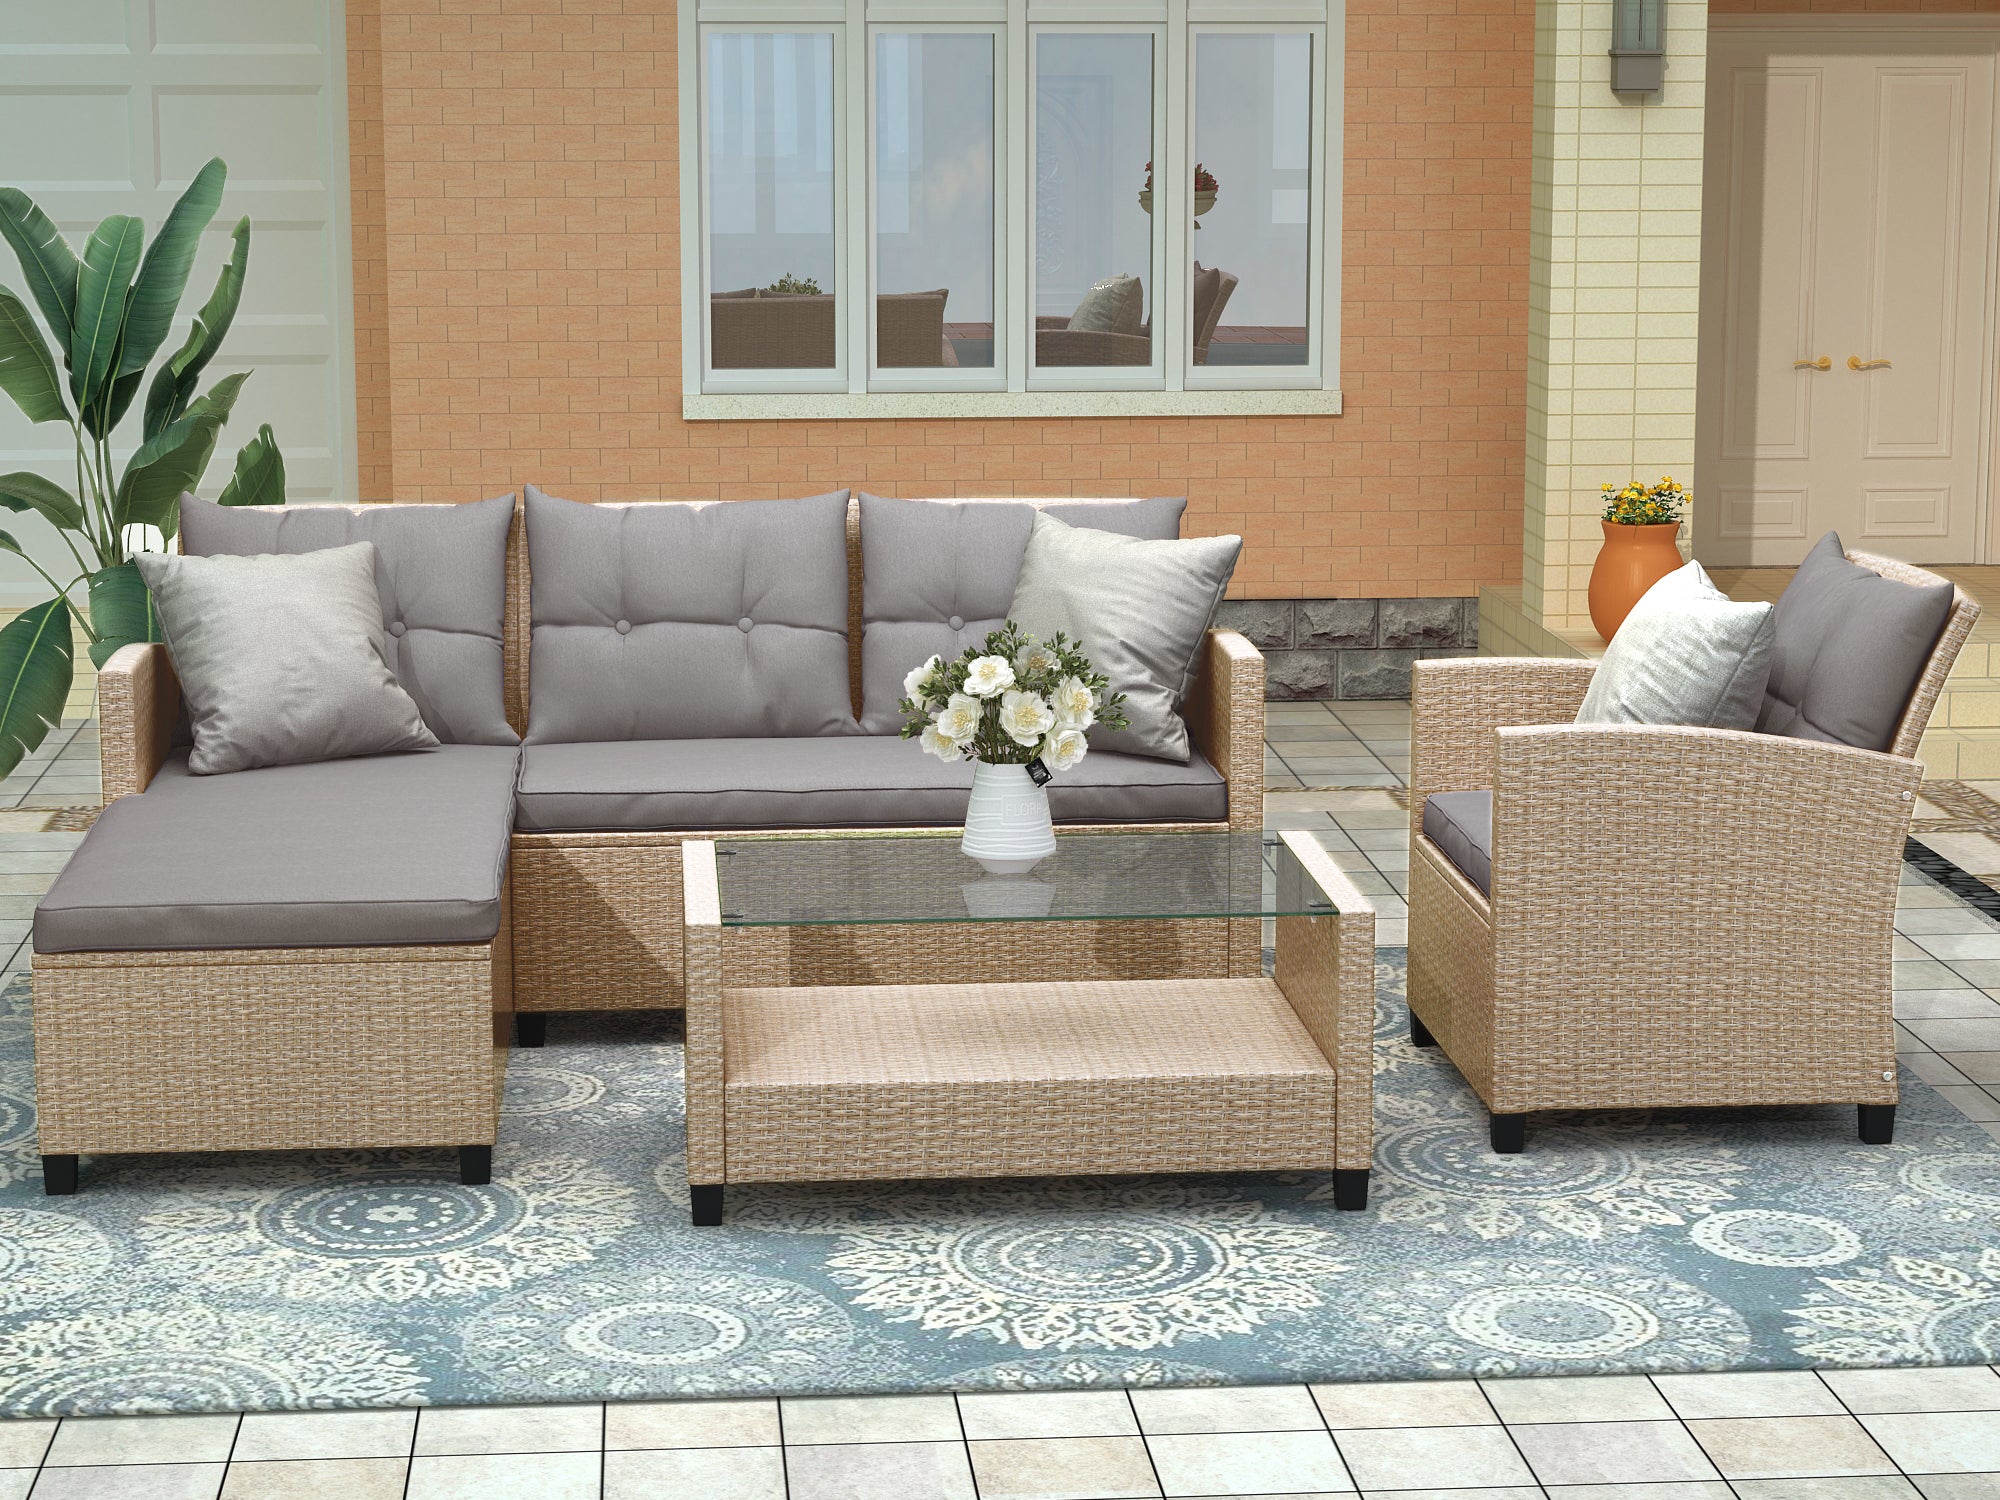 U-Style Outdoor Patio Furniture Sets: 4-Piece Conversation Set Wicker Rattan Sectional Sofa with Seat Cushions in Beige Brown | Ideal for Your Outdoor Space